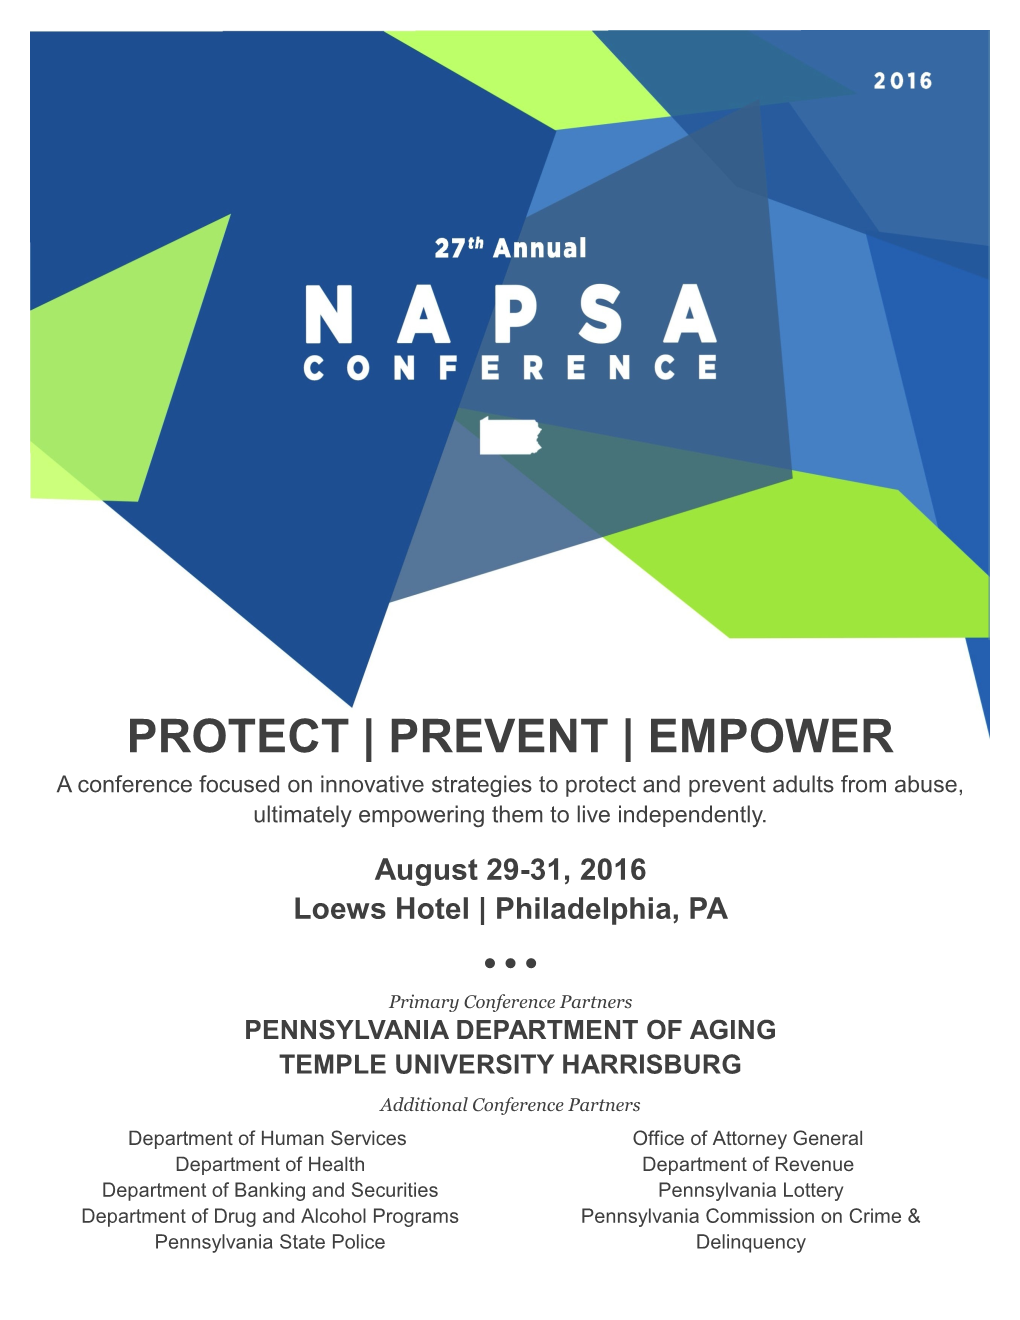 PREVENT | EMPOWER a Conference Focused on Innovative Strategies to Protect and Prevent Adults from Abuse, Ultimately Empowering Them to Live Independently